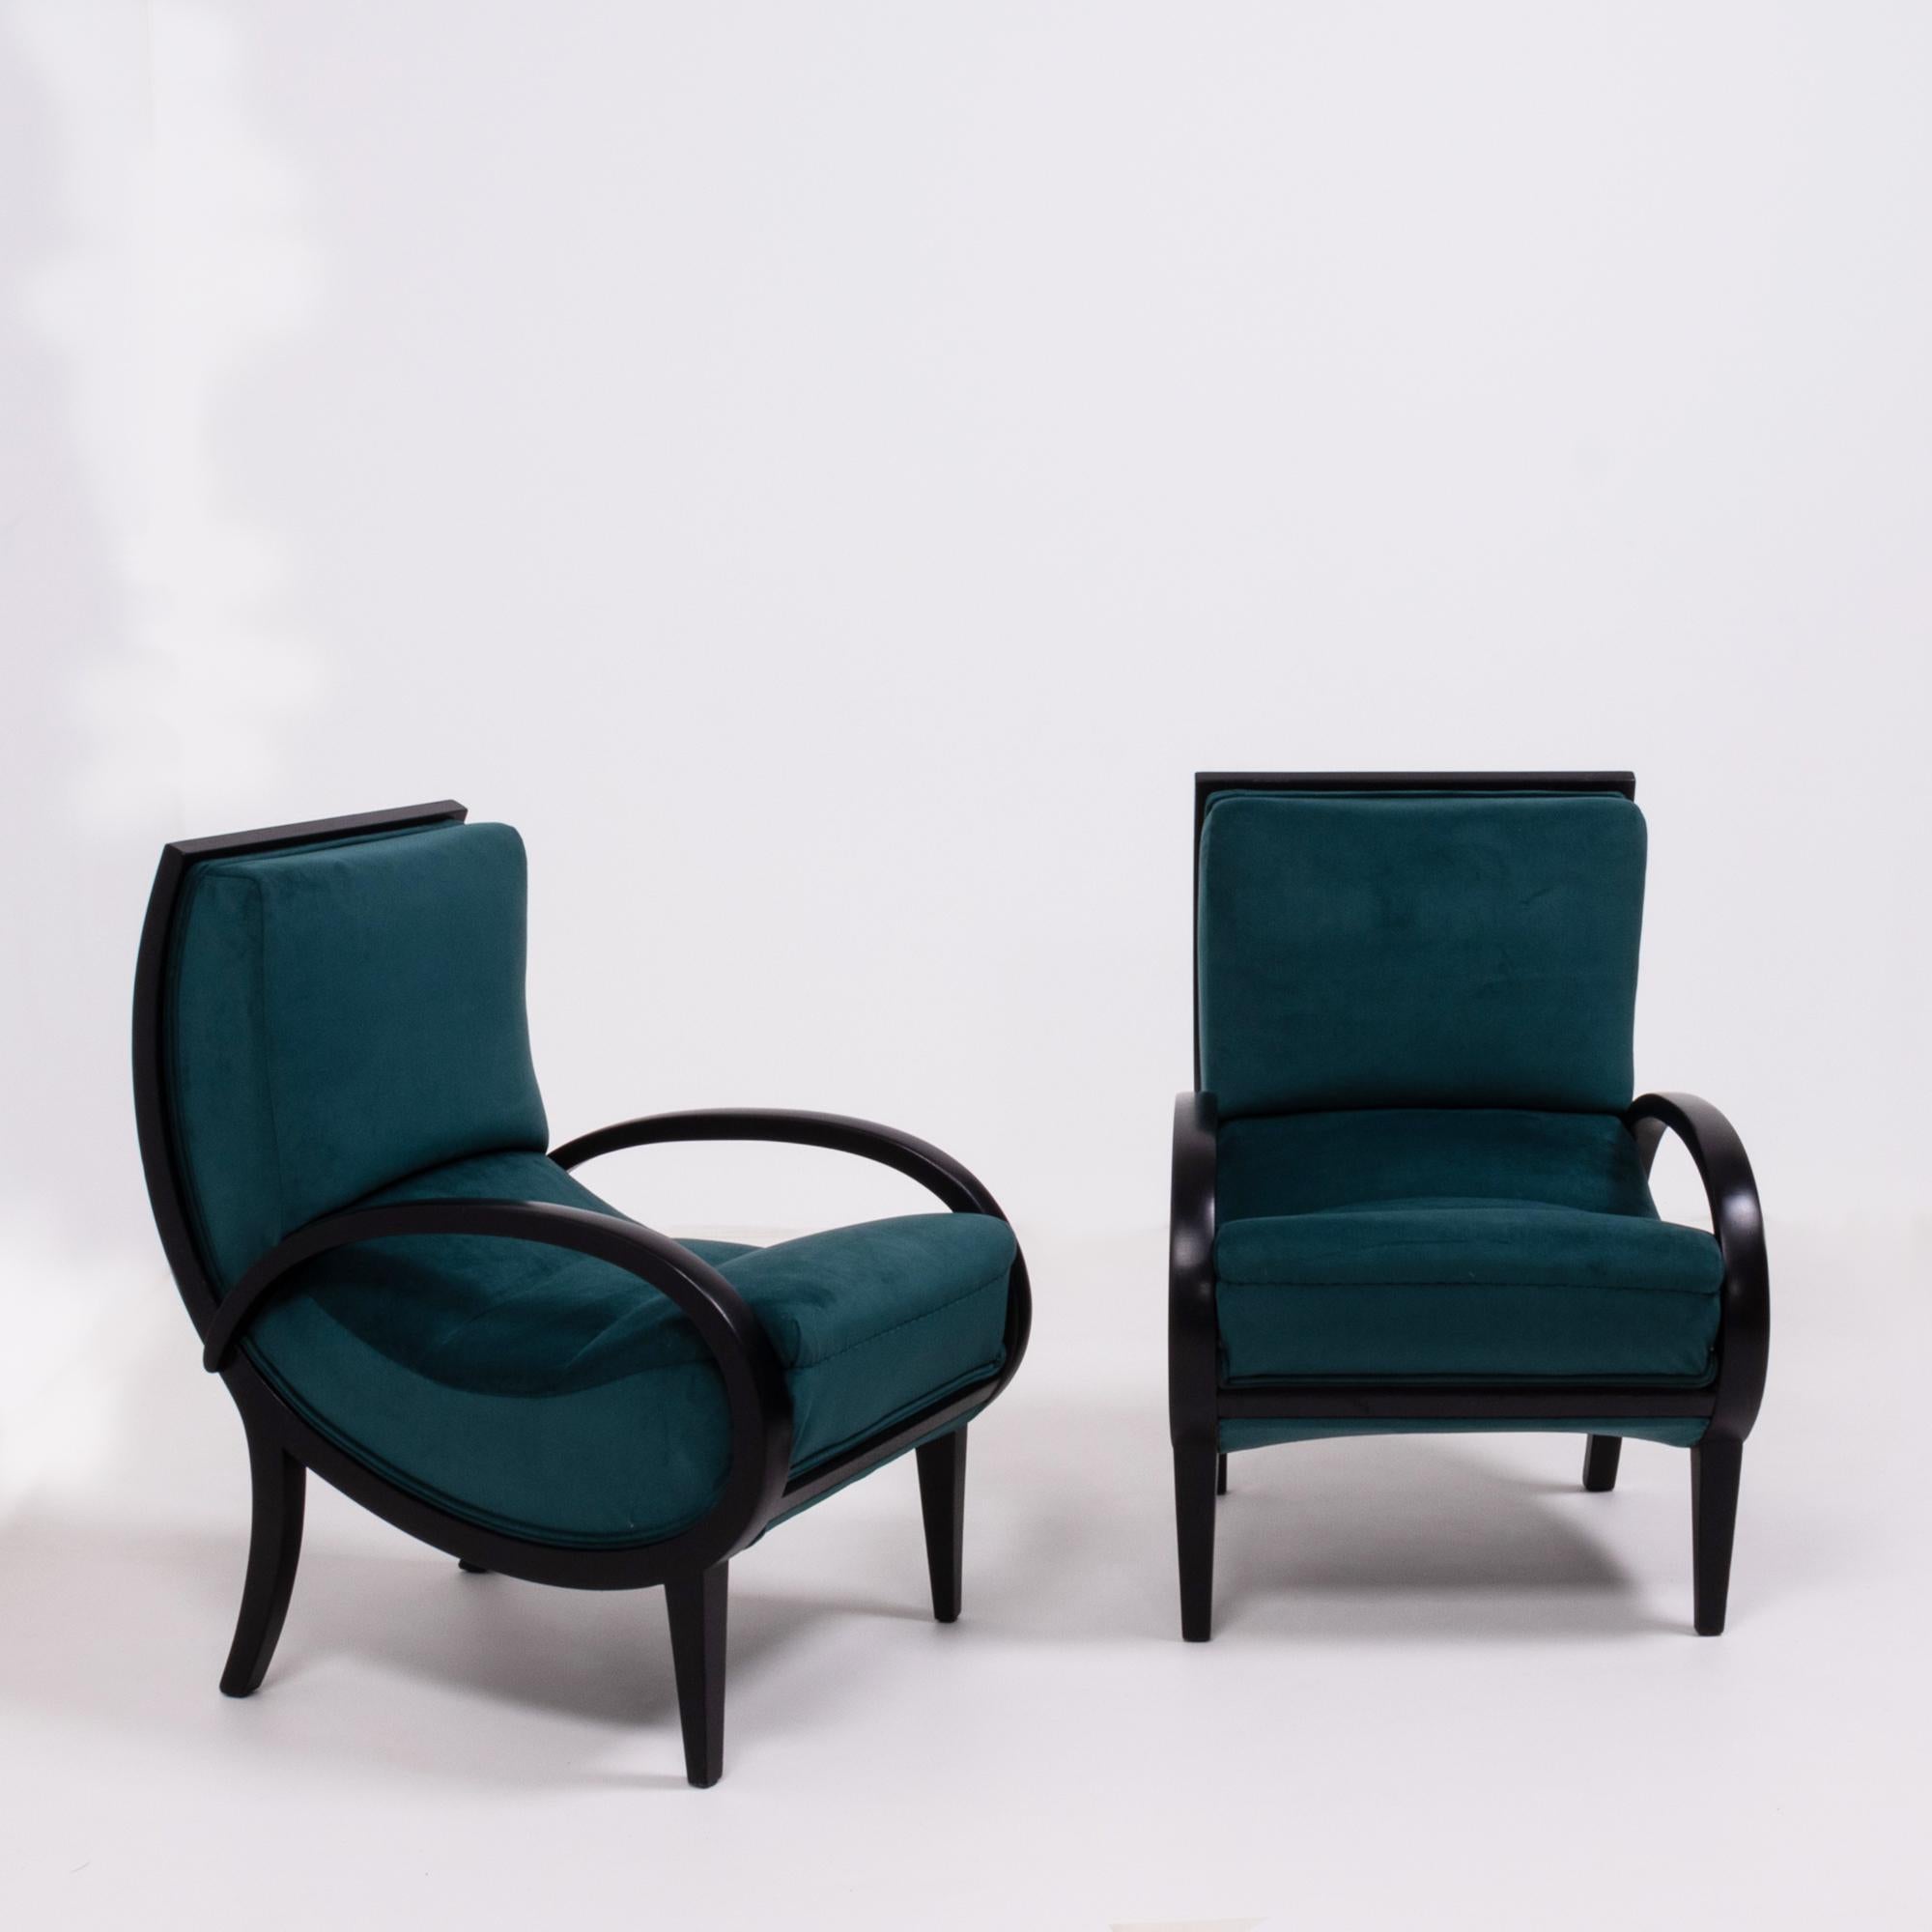 This pair of original Art Deco armchairs designed in the style of Jindrich Halabala have been completely restored and newly and fully reupholstered in sumptuous teal velvet.

The frame and arms are constructed from dark bentwood, creating smooth,